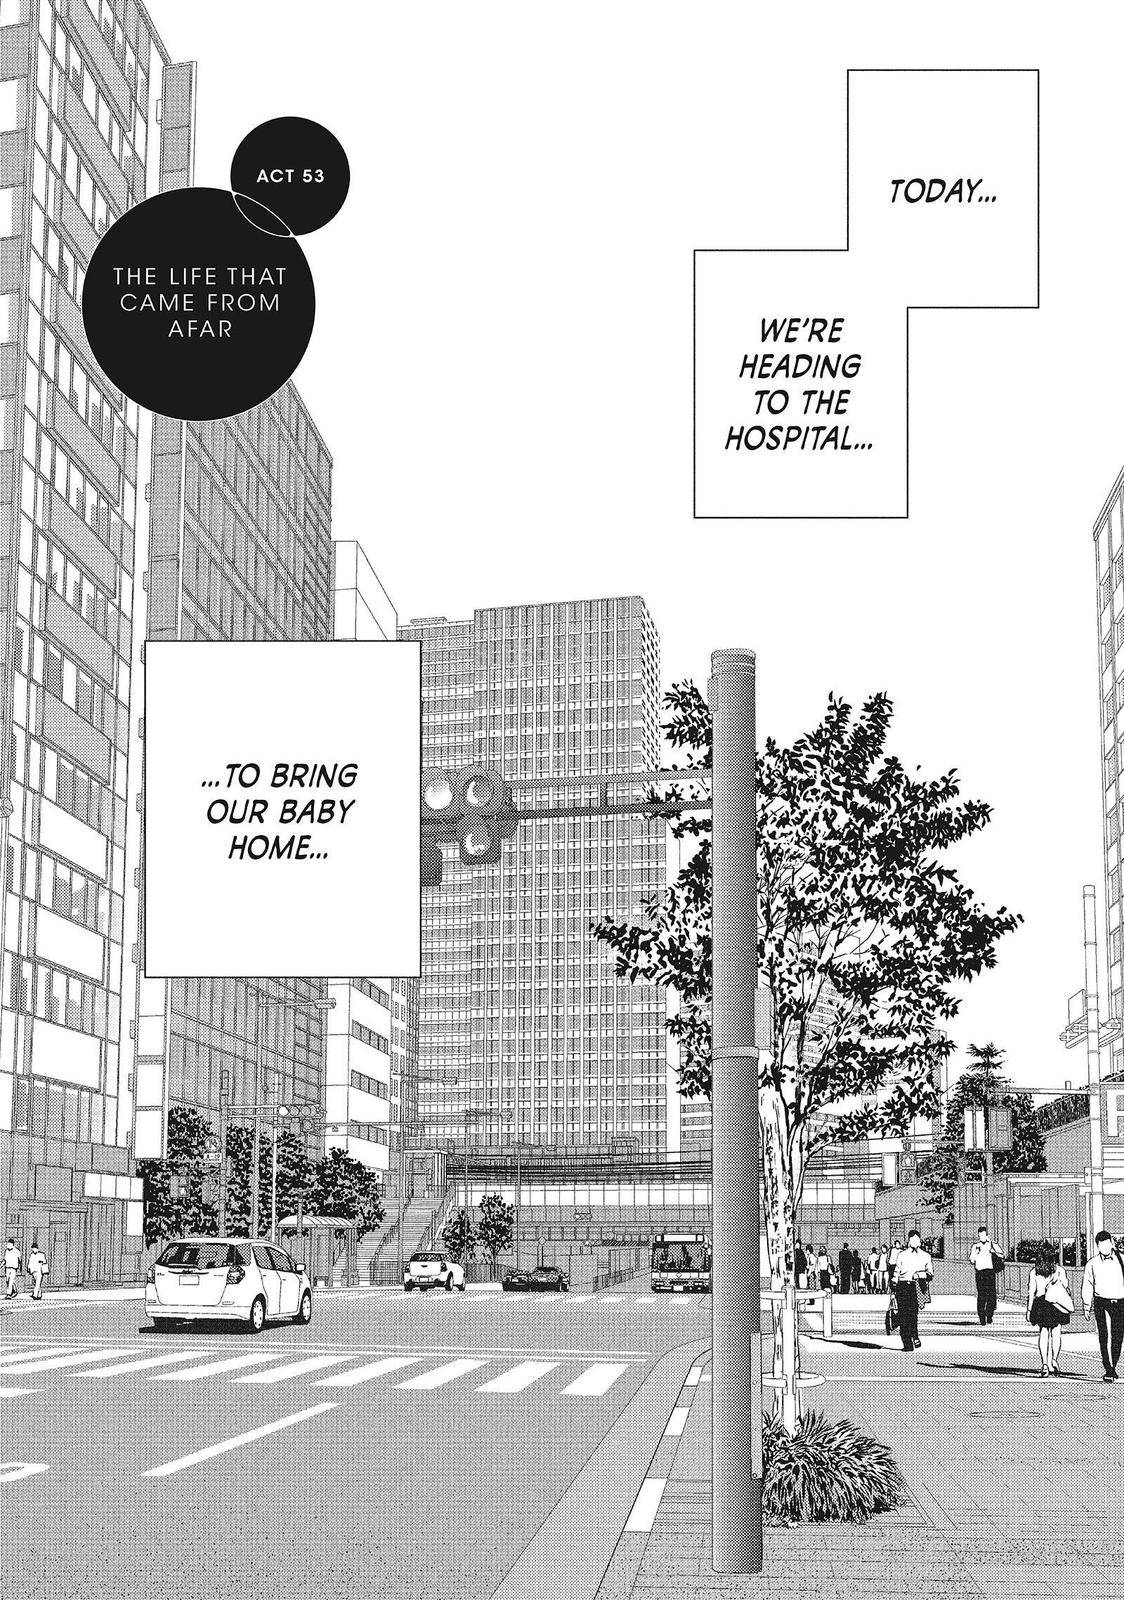 Perfect World (ARUGA Rie) - chapter 53 - #2